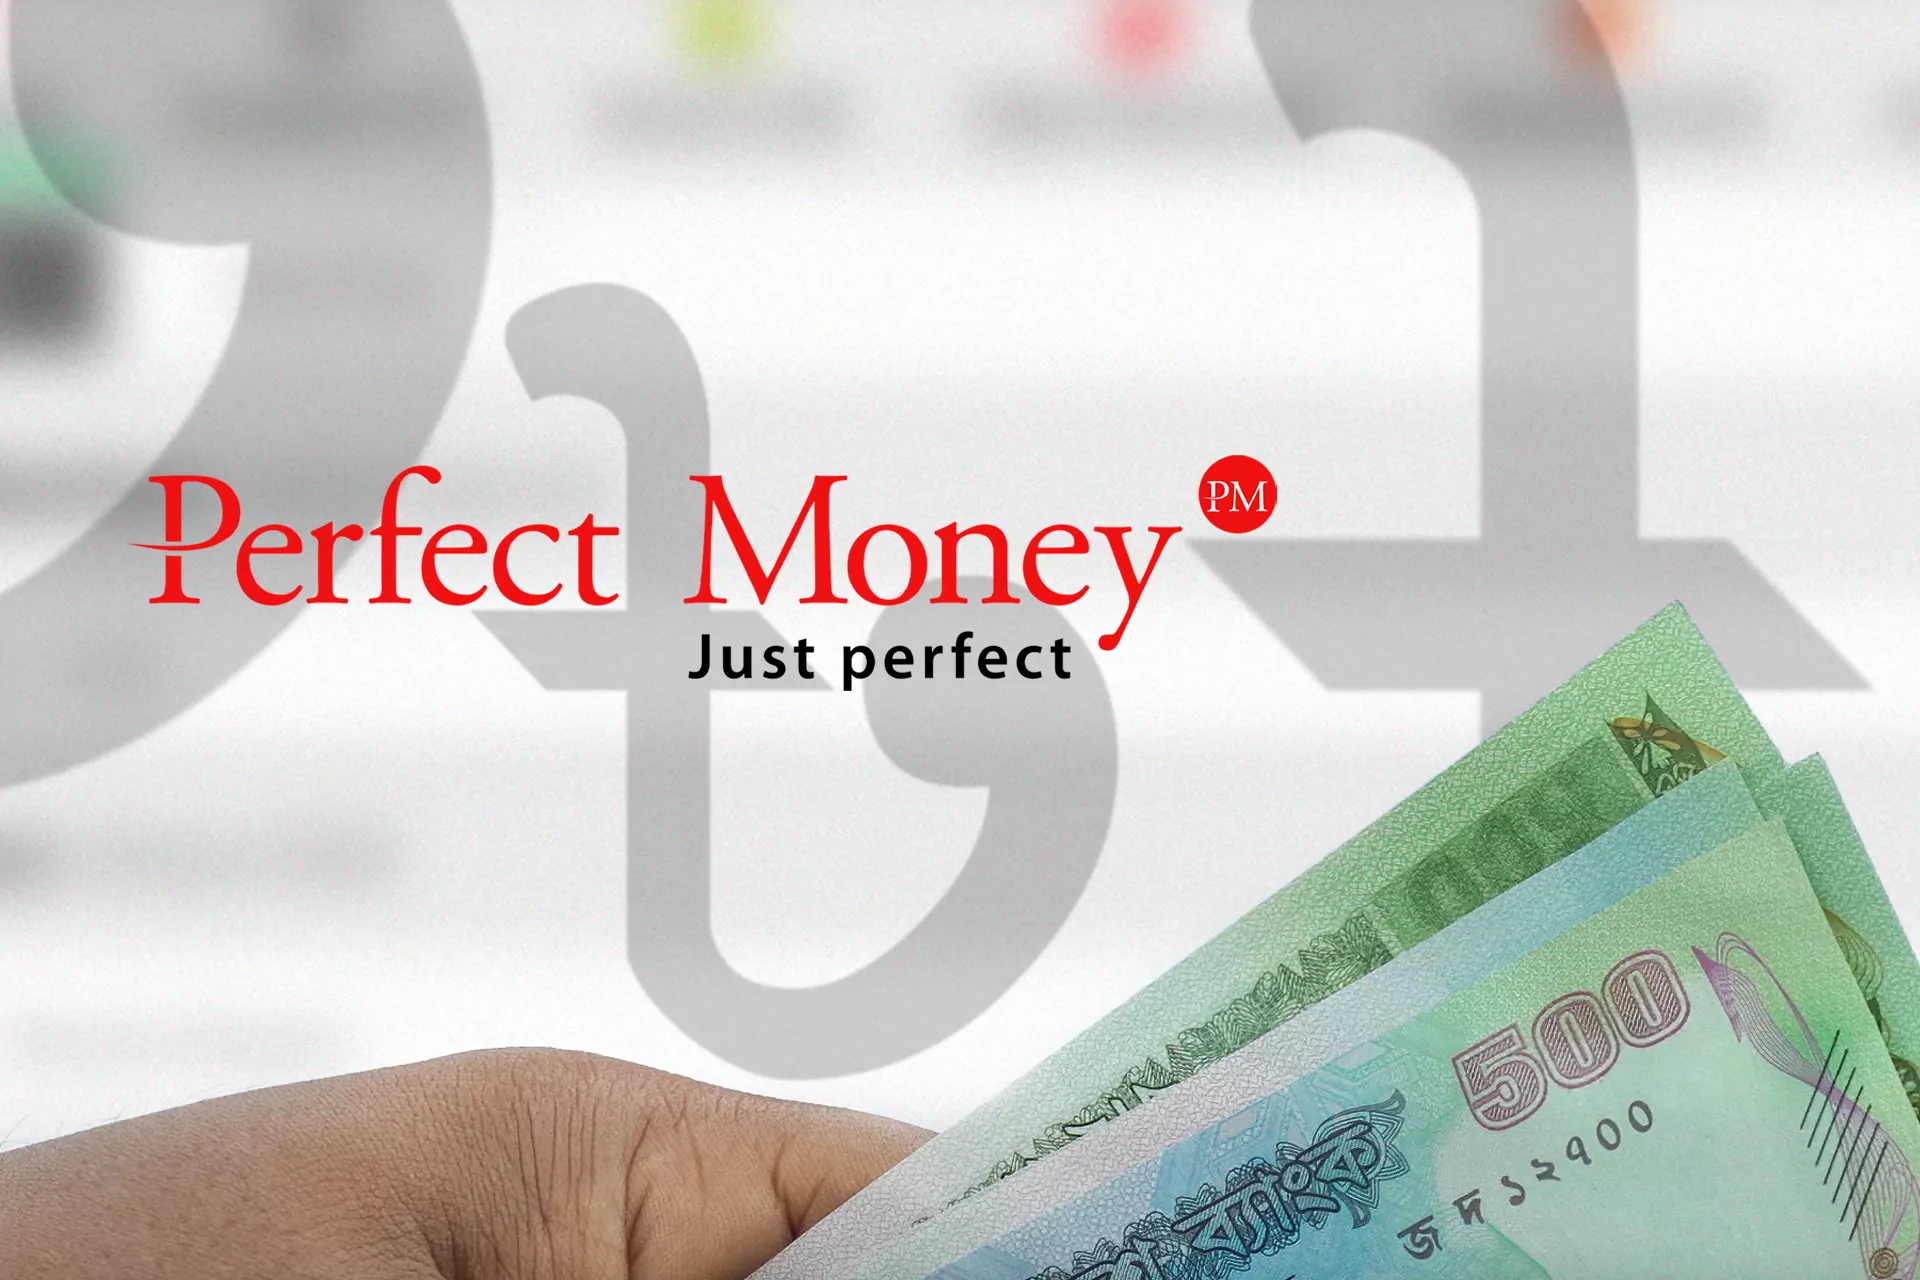 Perfect Money is pretty popular in Bangladesh because of its easy way to exchange money between users and small commissions.